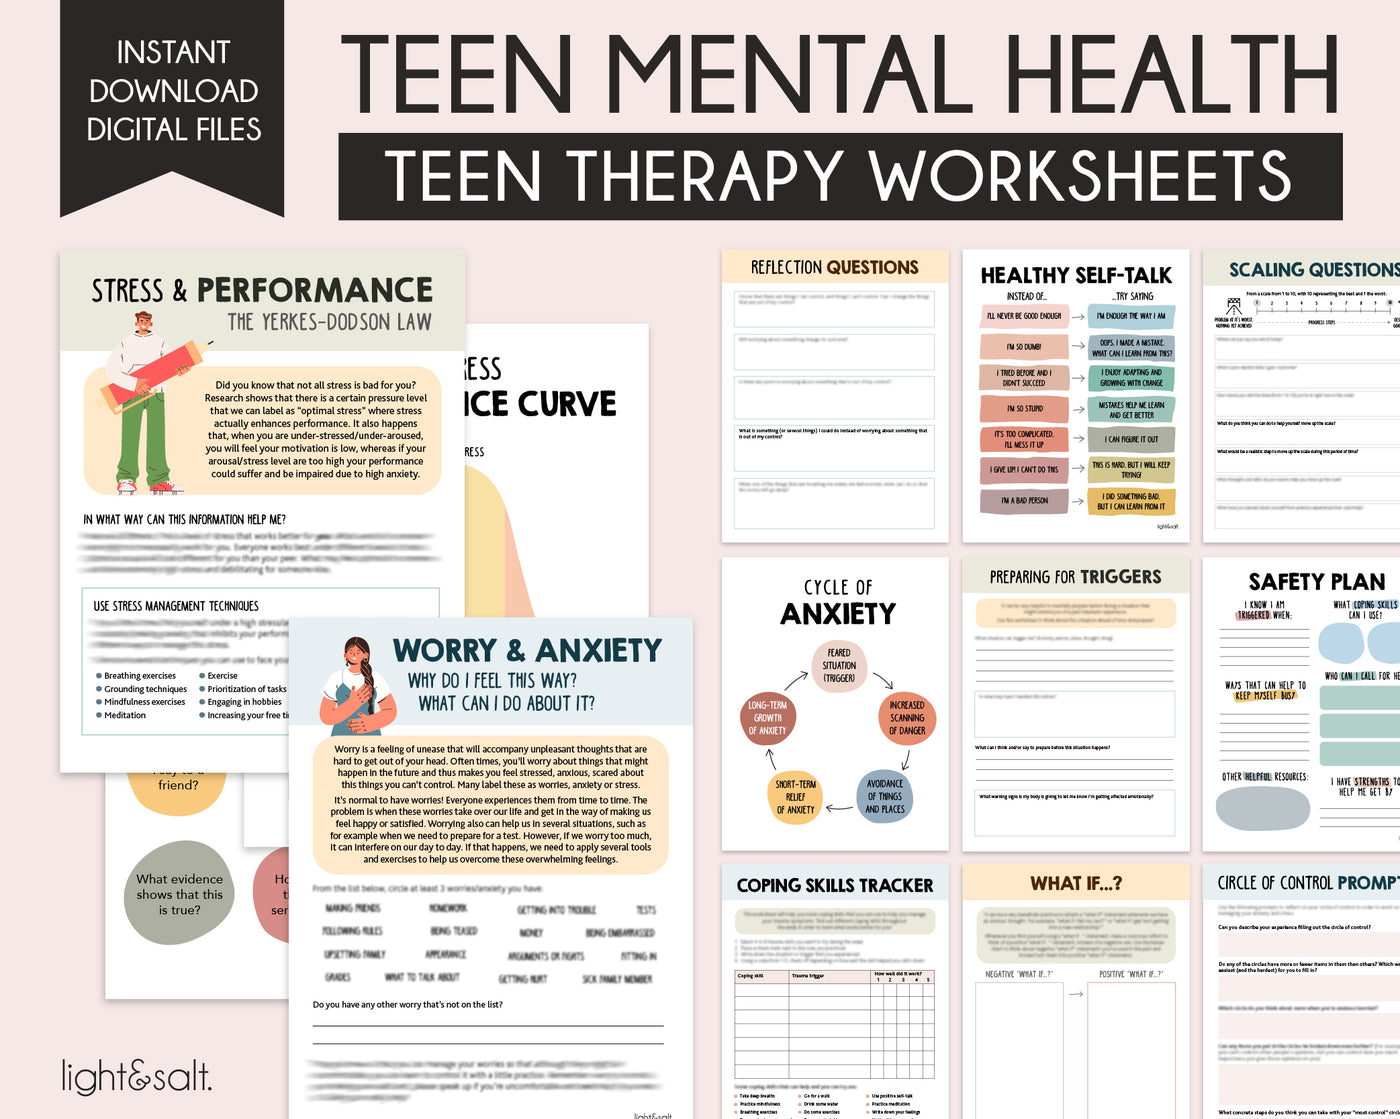 Teen mental health therapy worksheets